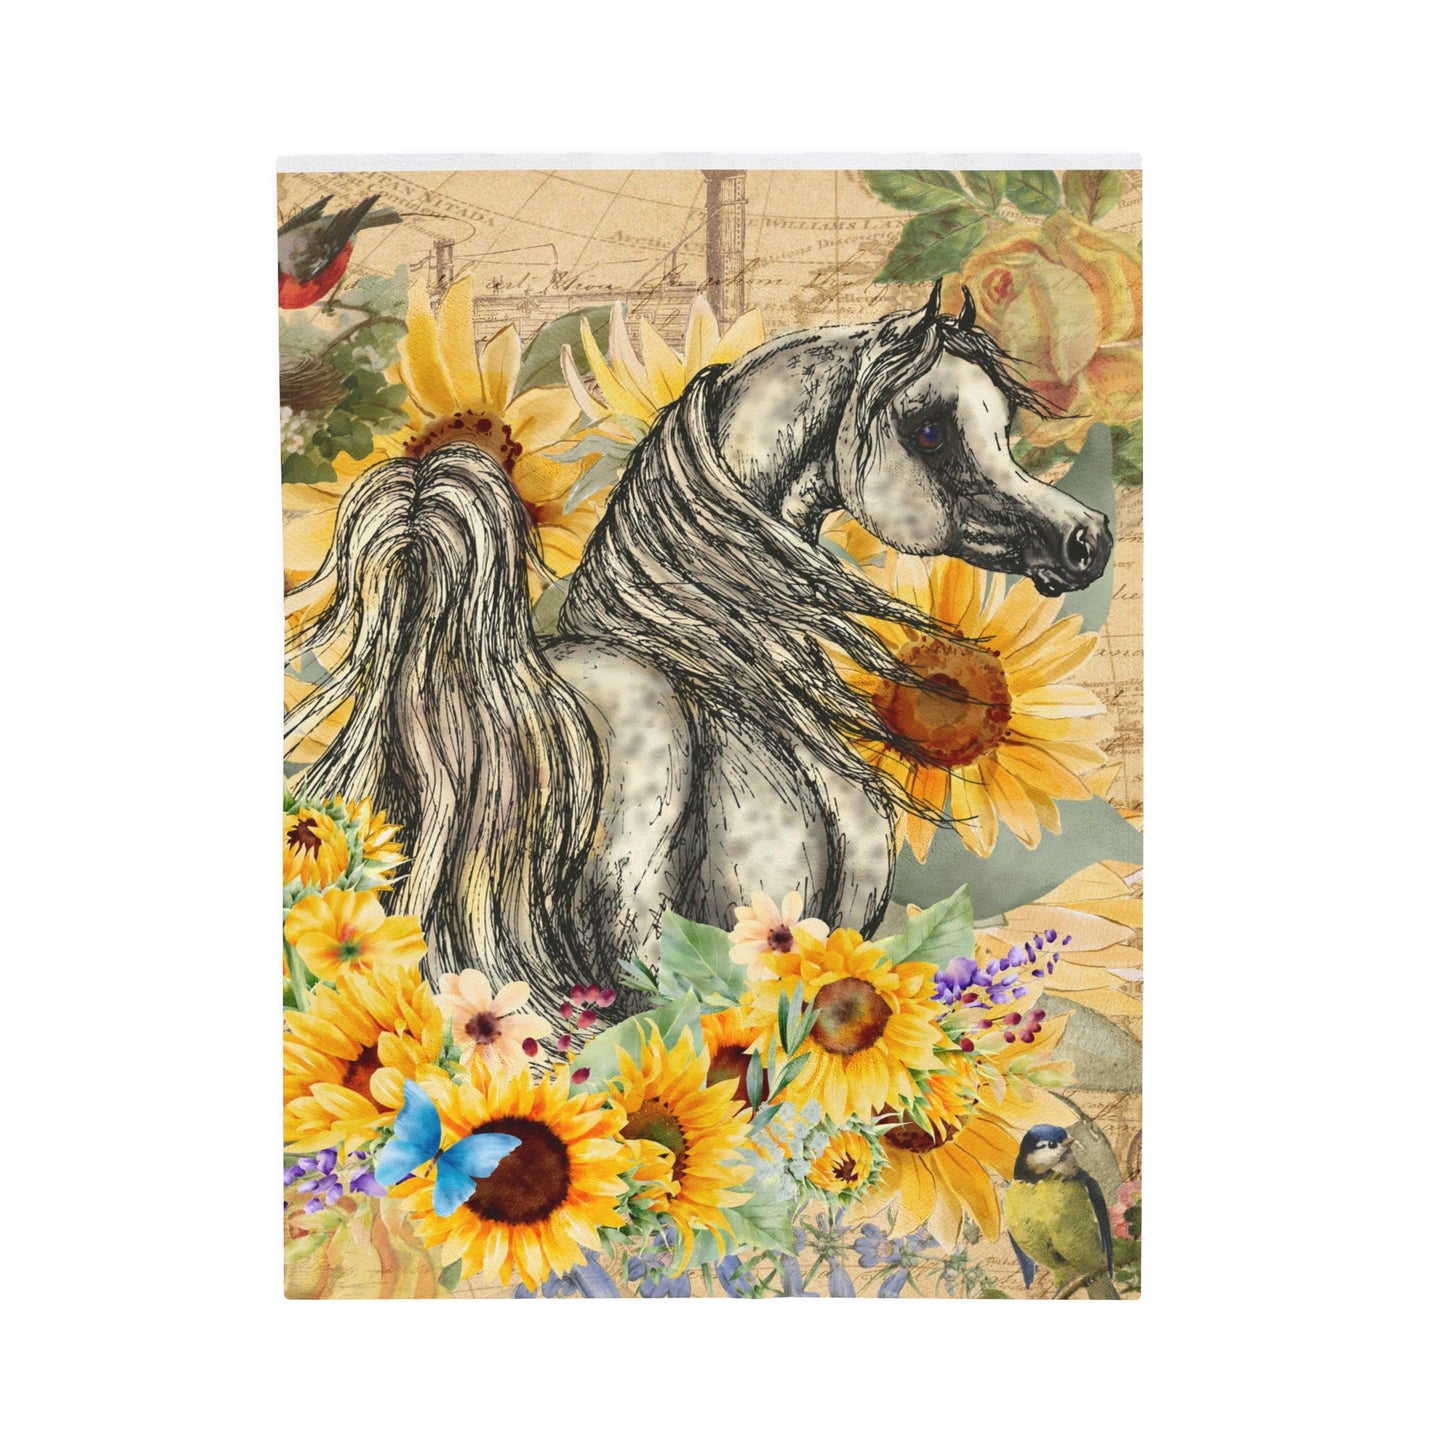 Arabian Horse with Sunflowers, Roses and Birds Plush Blanket